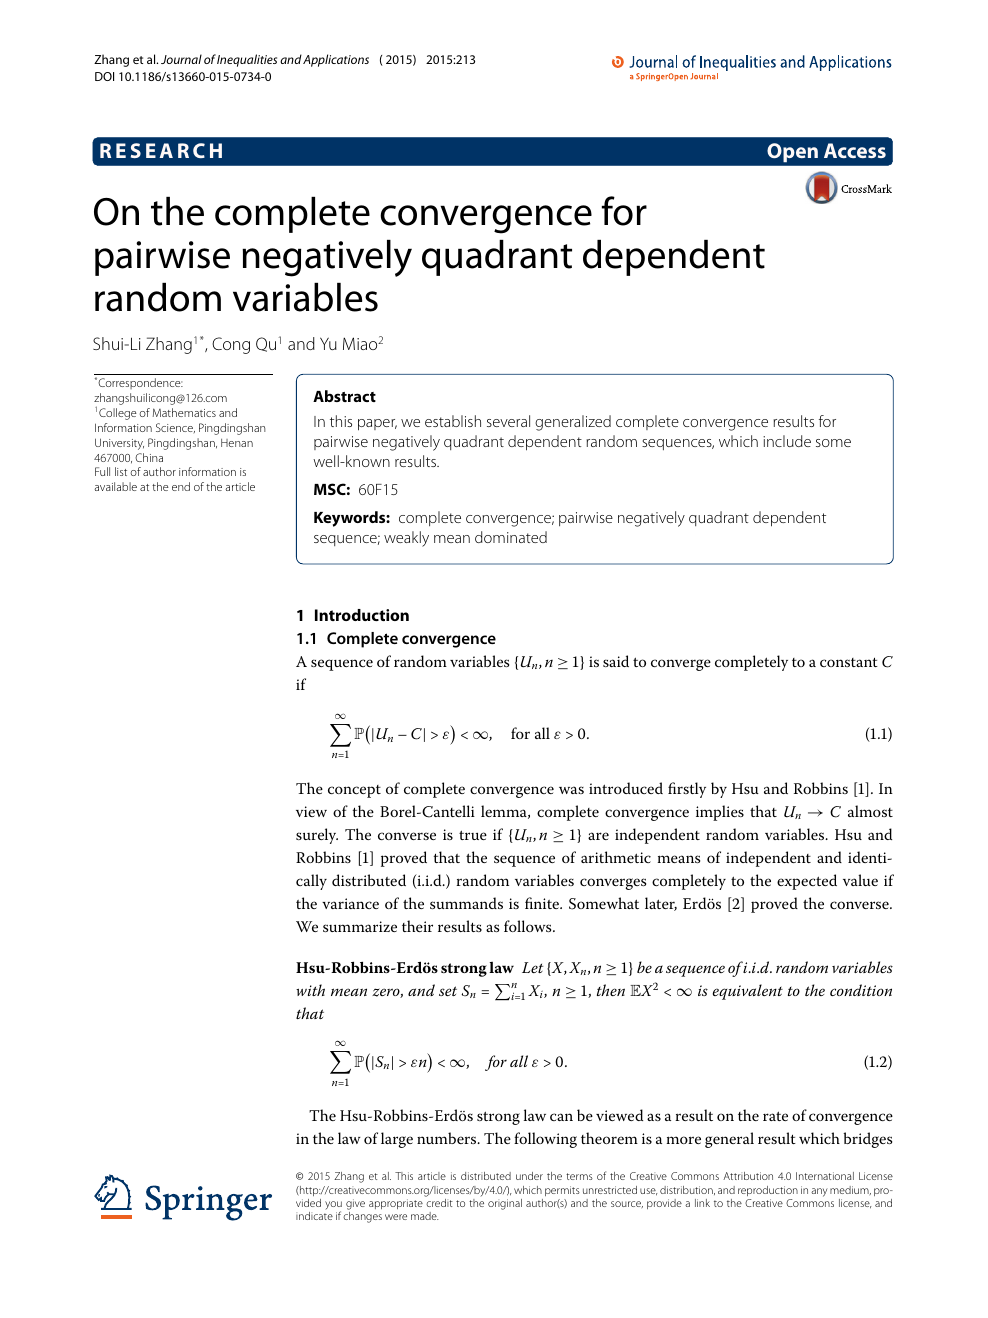 On The Complete Convergence For Pairwise Negatively Quadrant Dependent Random Variables Topic Of Research Paper In Mathematics Download Scholarly Article Pdf And Read For Free On Cyberleninka Open Science Hub